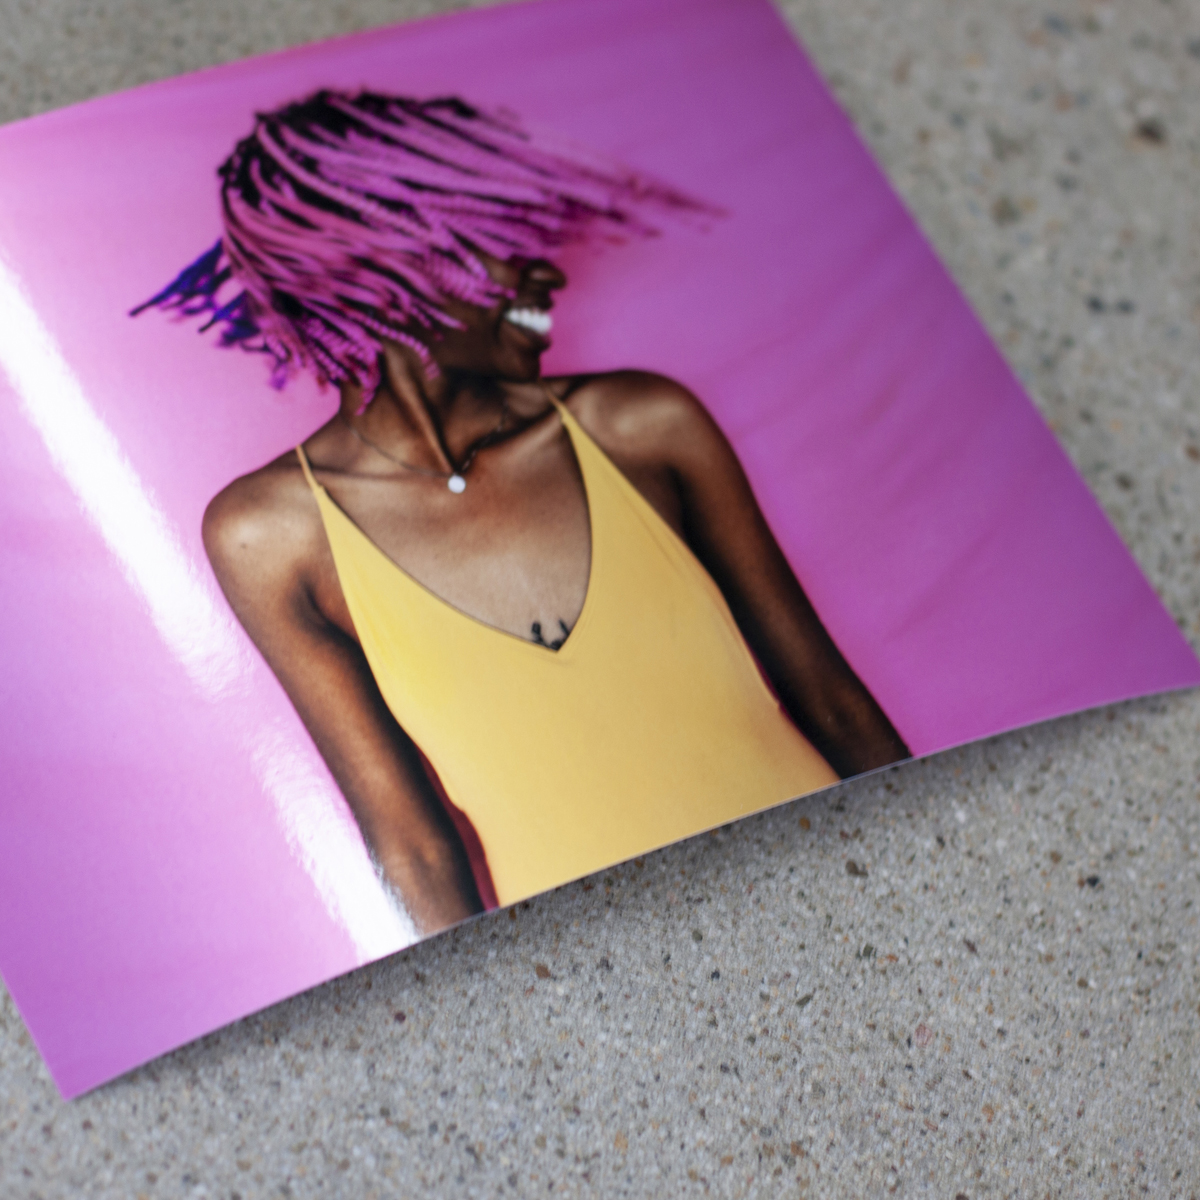 Image printed on metallic photo paper of woman with hot pink hair